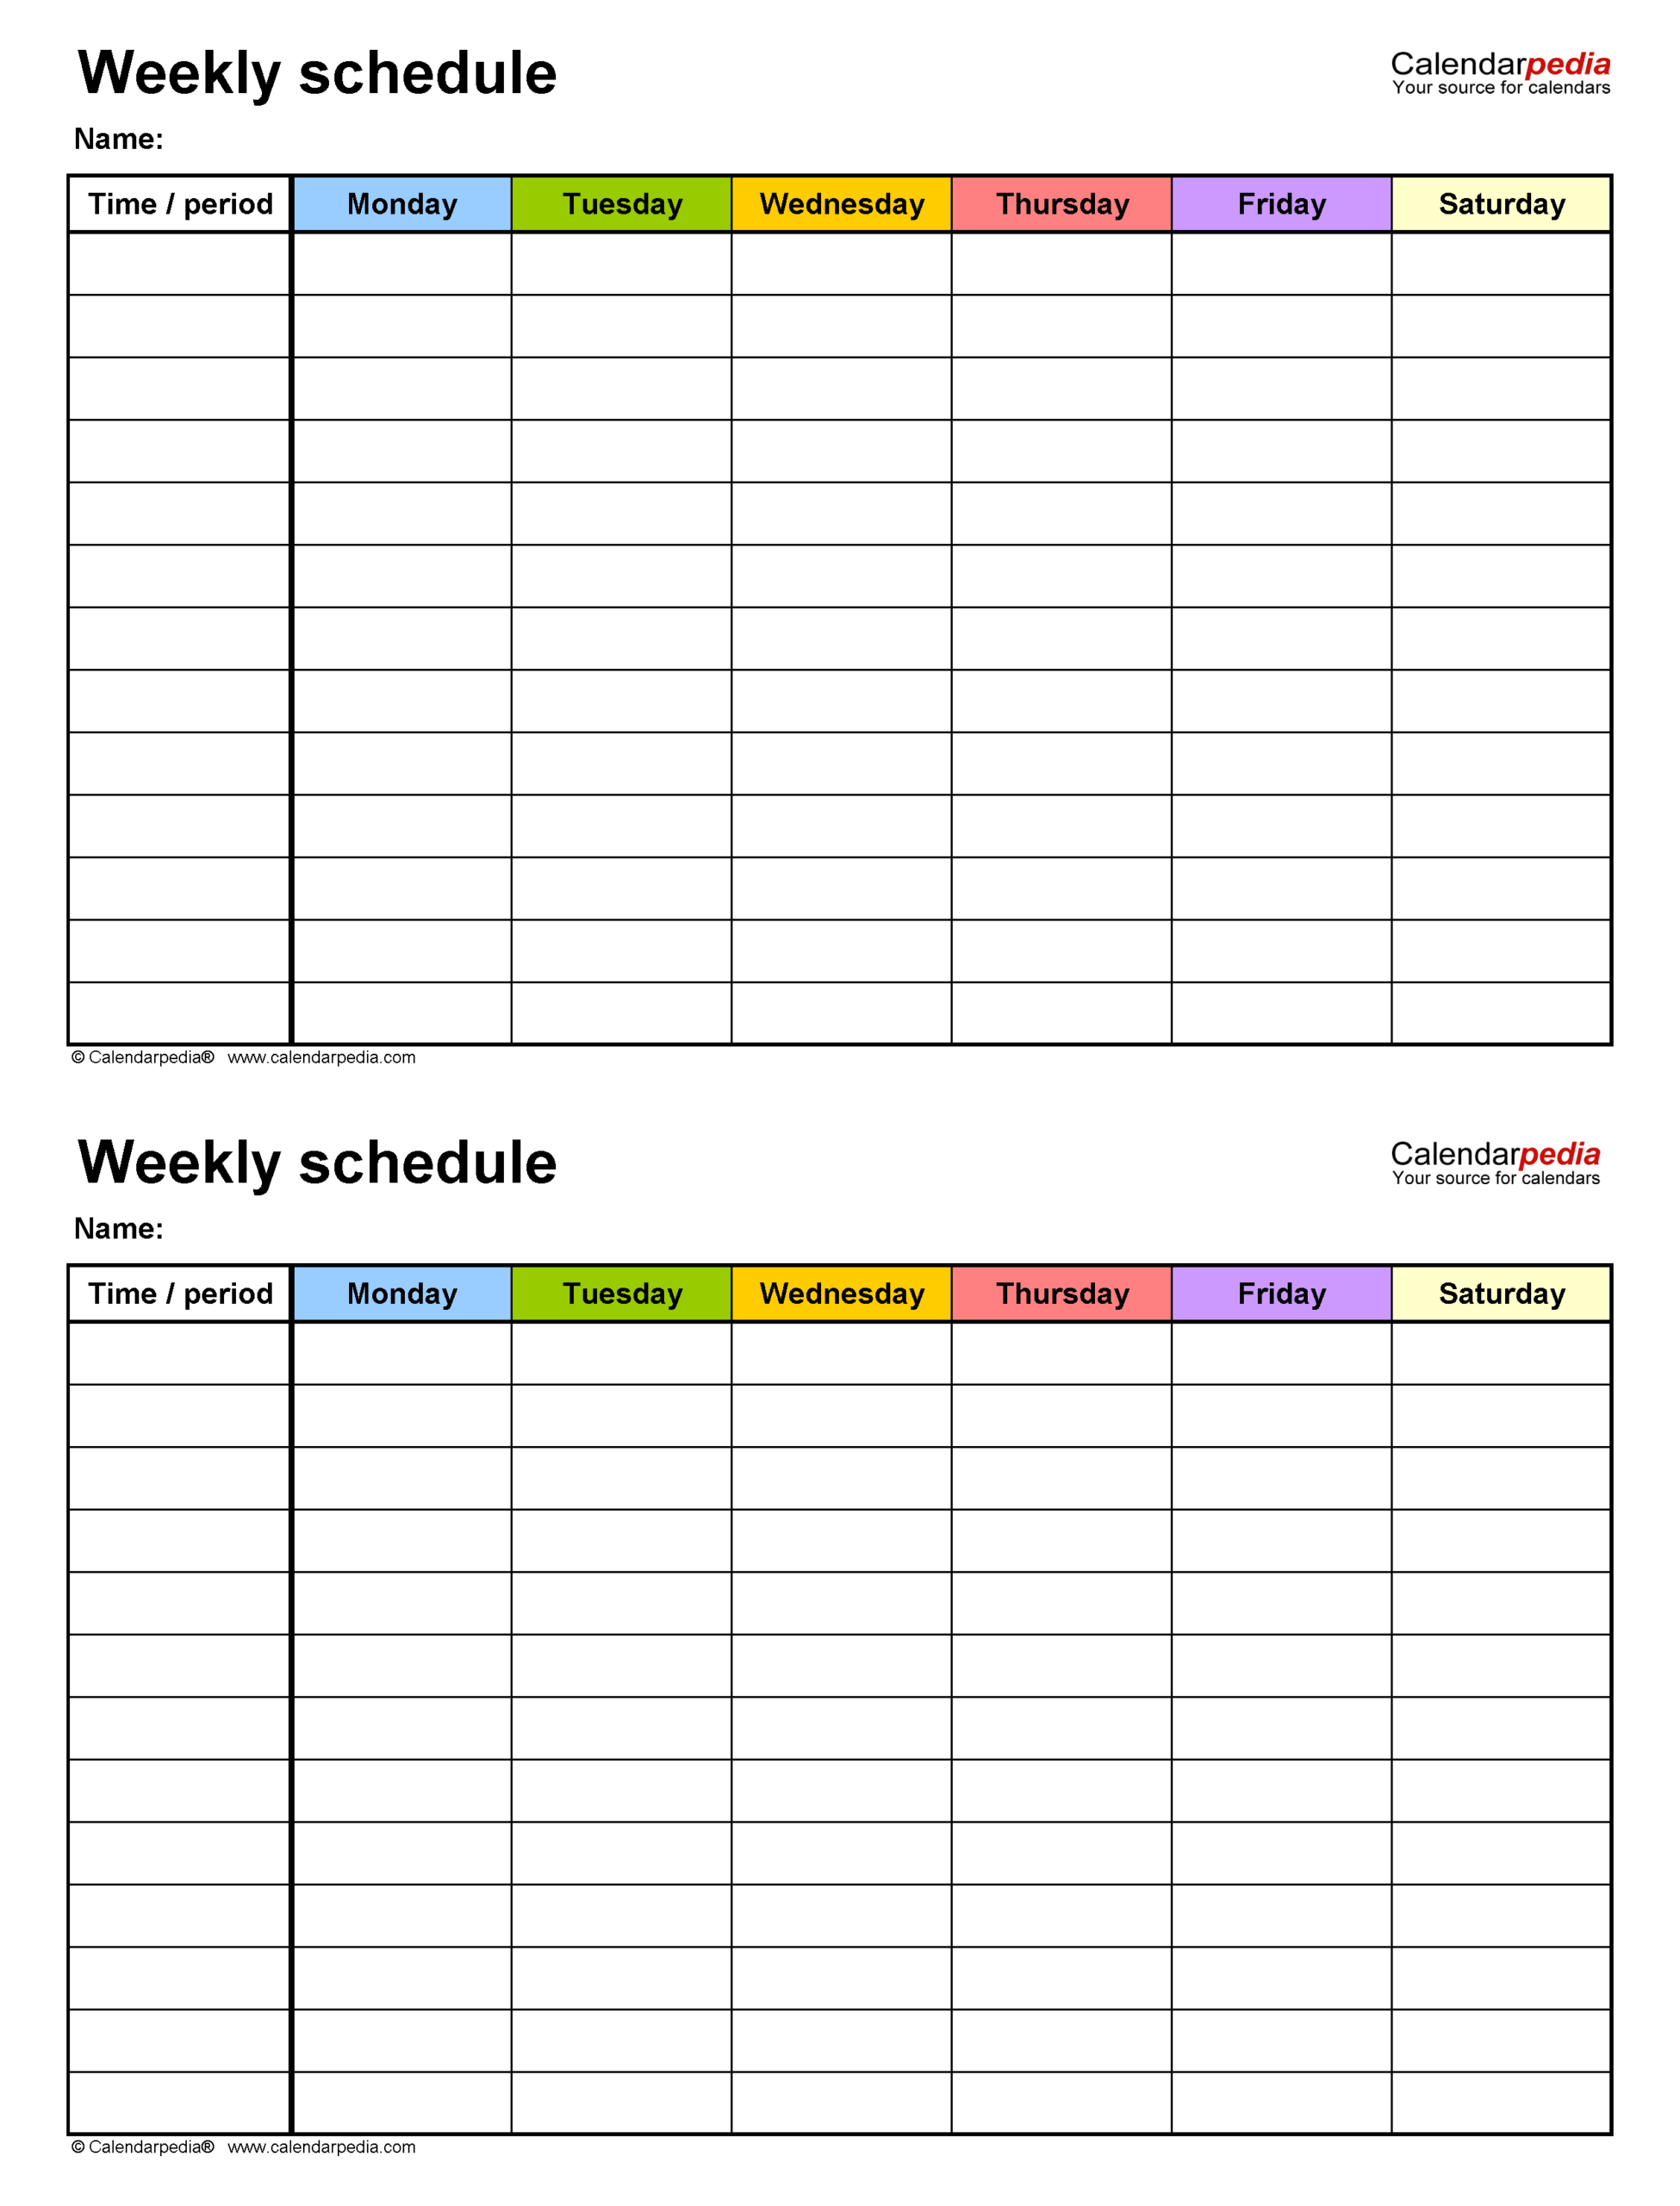 Free Weekly Schedule Templates For Word  18 Templates with 2 Week Blank Calendar